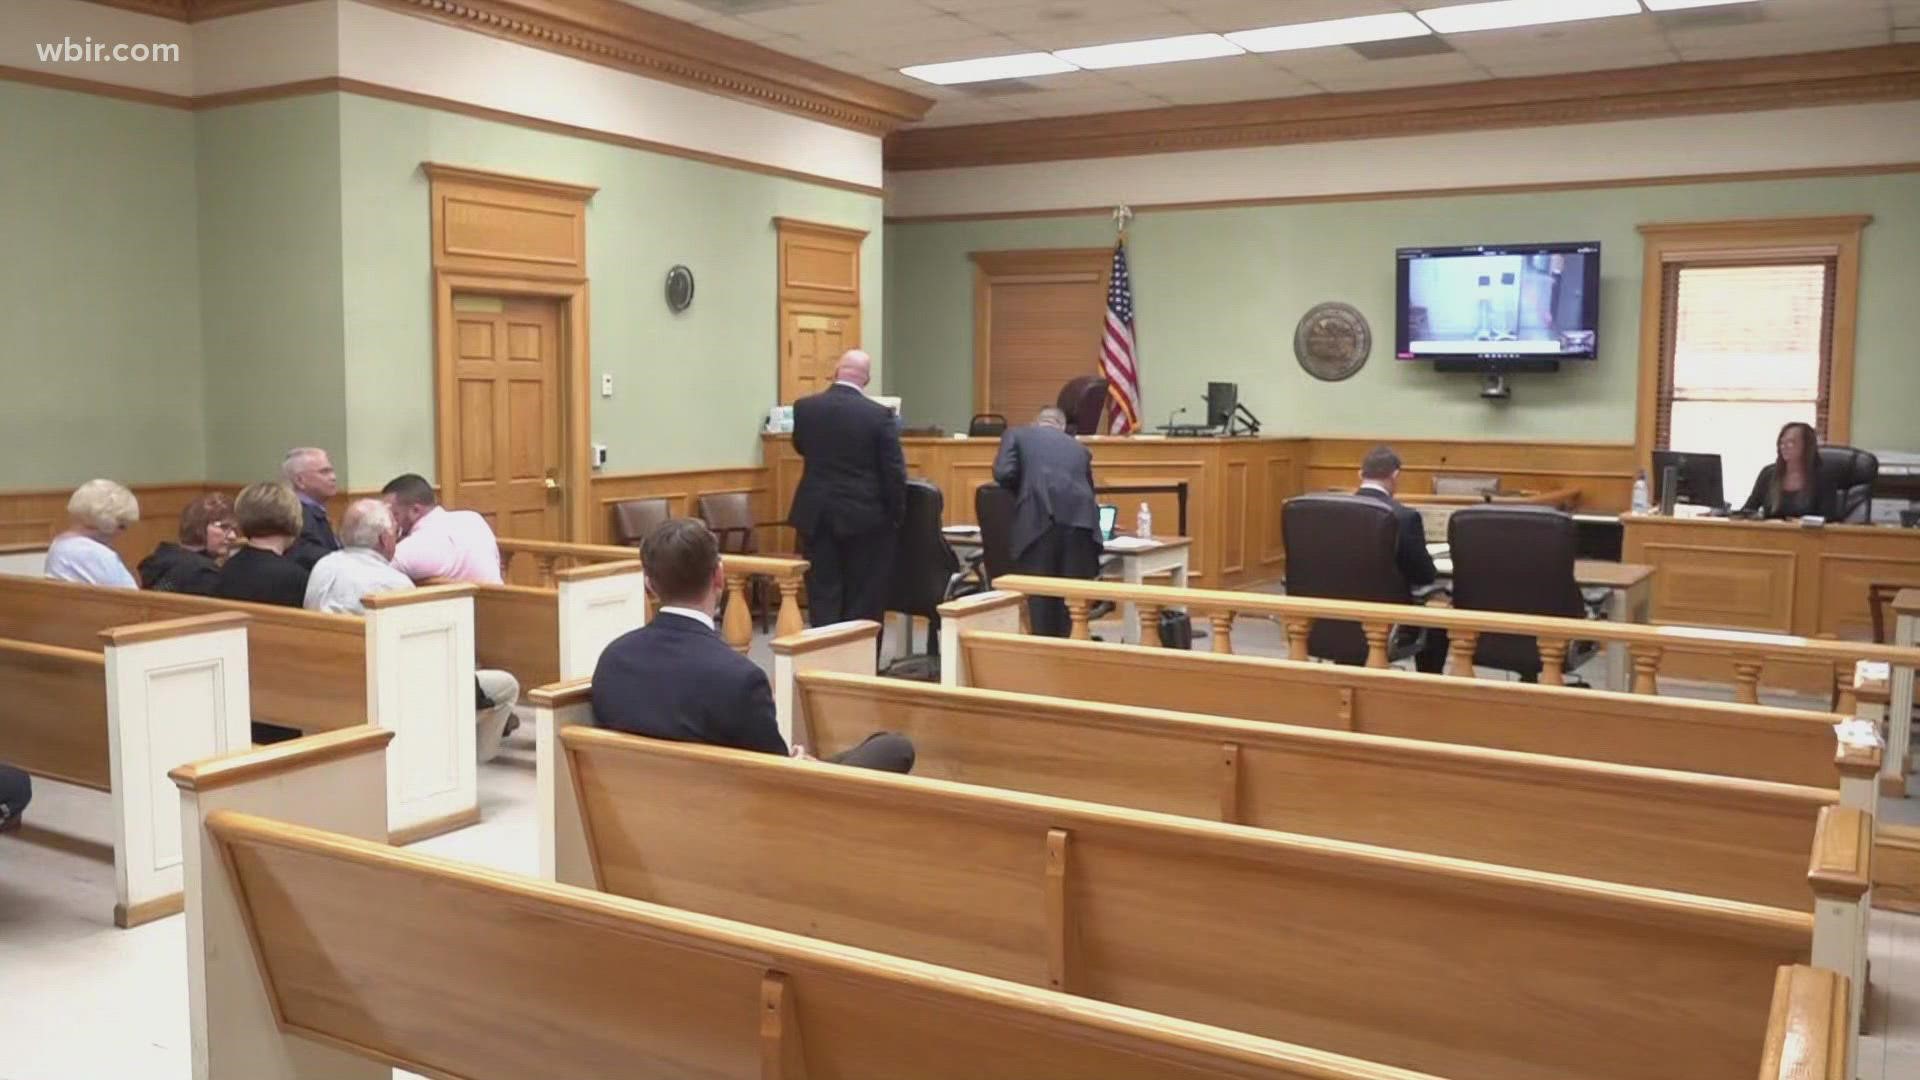 The preliminary hearing for Christopher Savannah was held in a Roane County courtroom Tuesday afternoon.